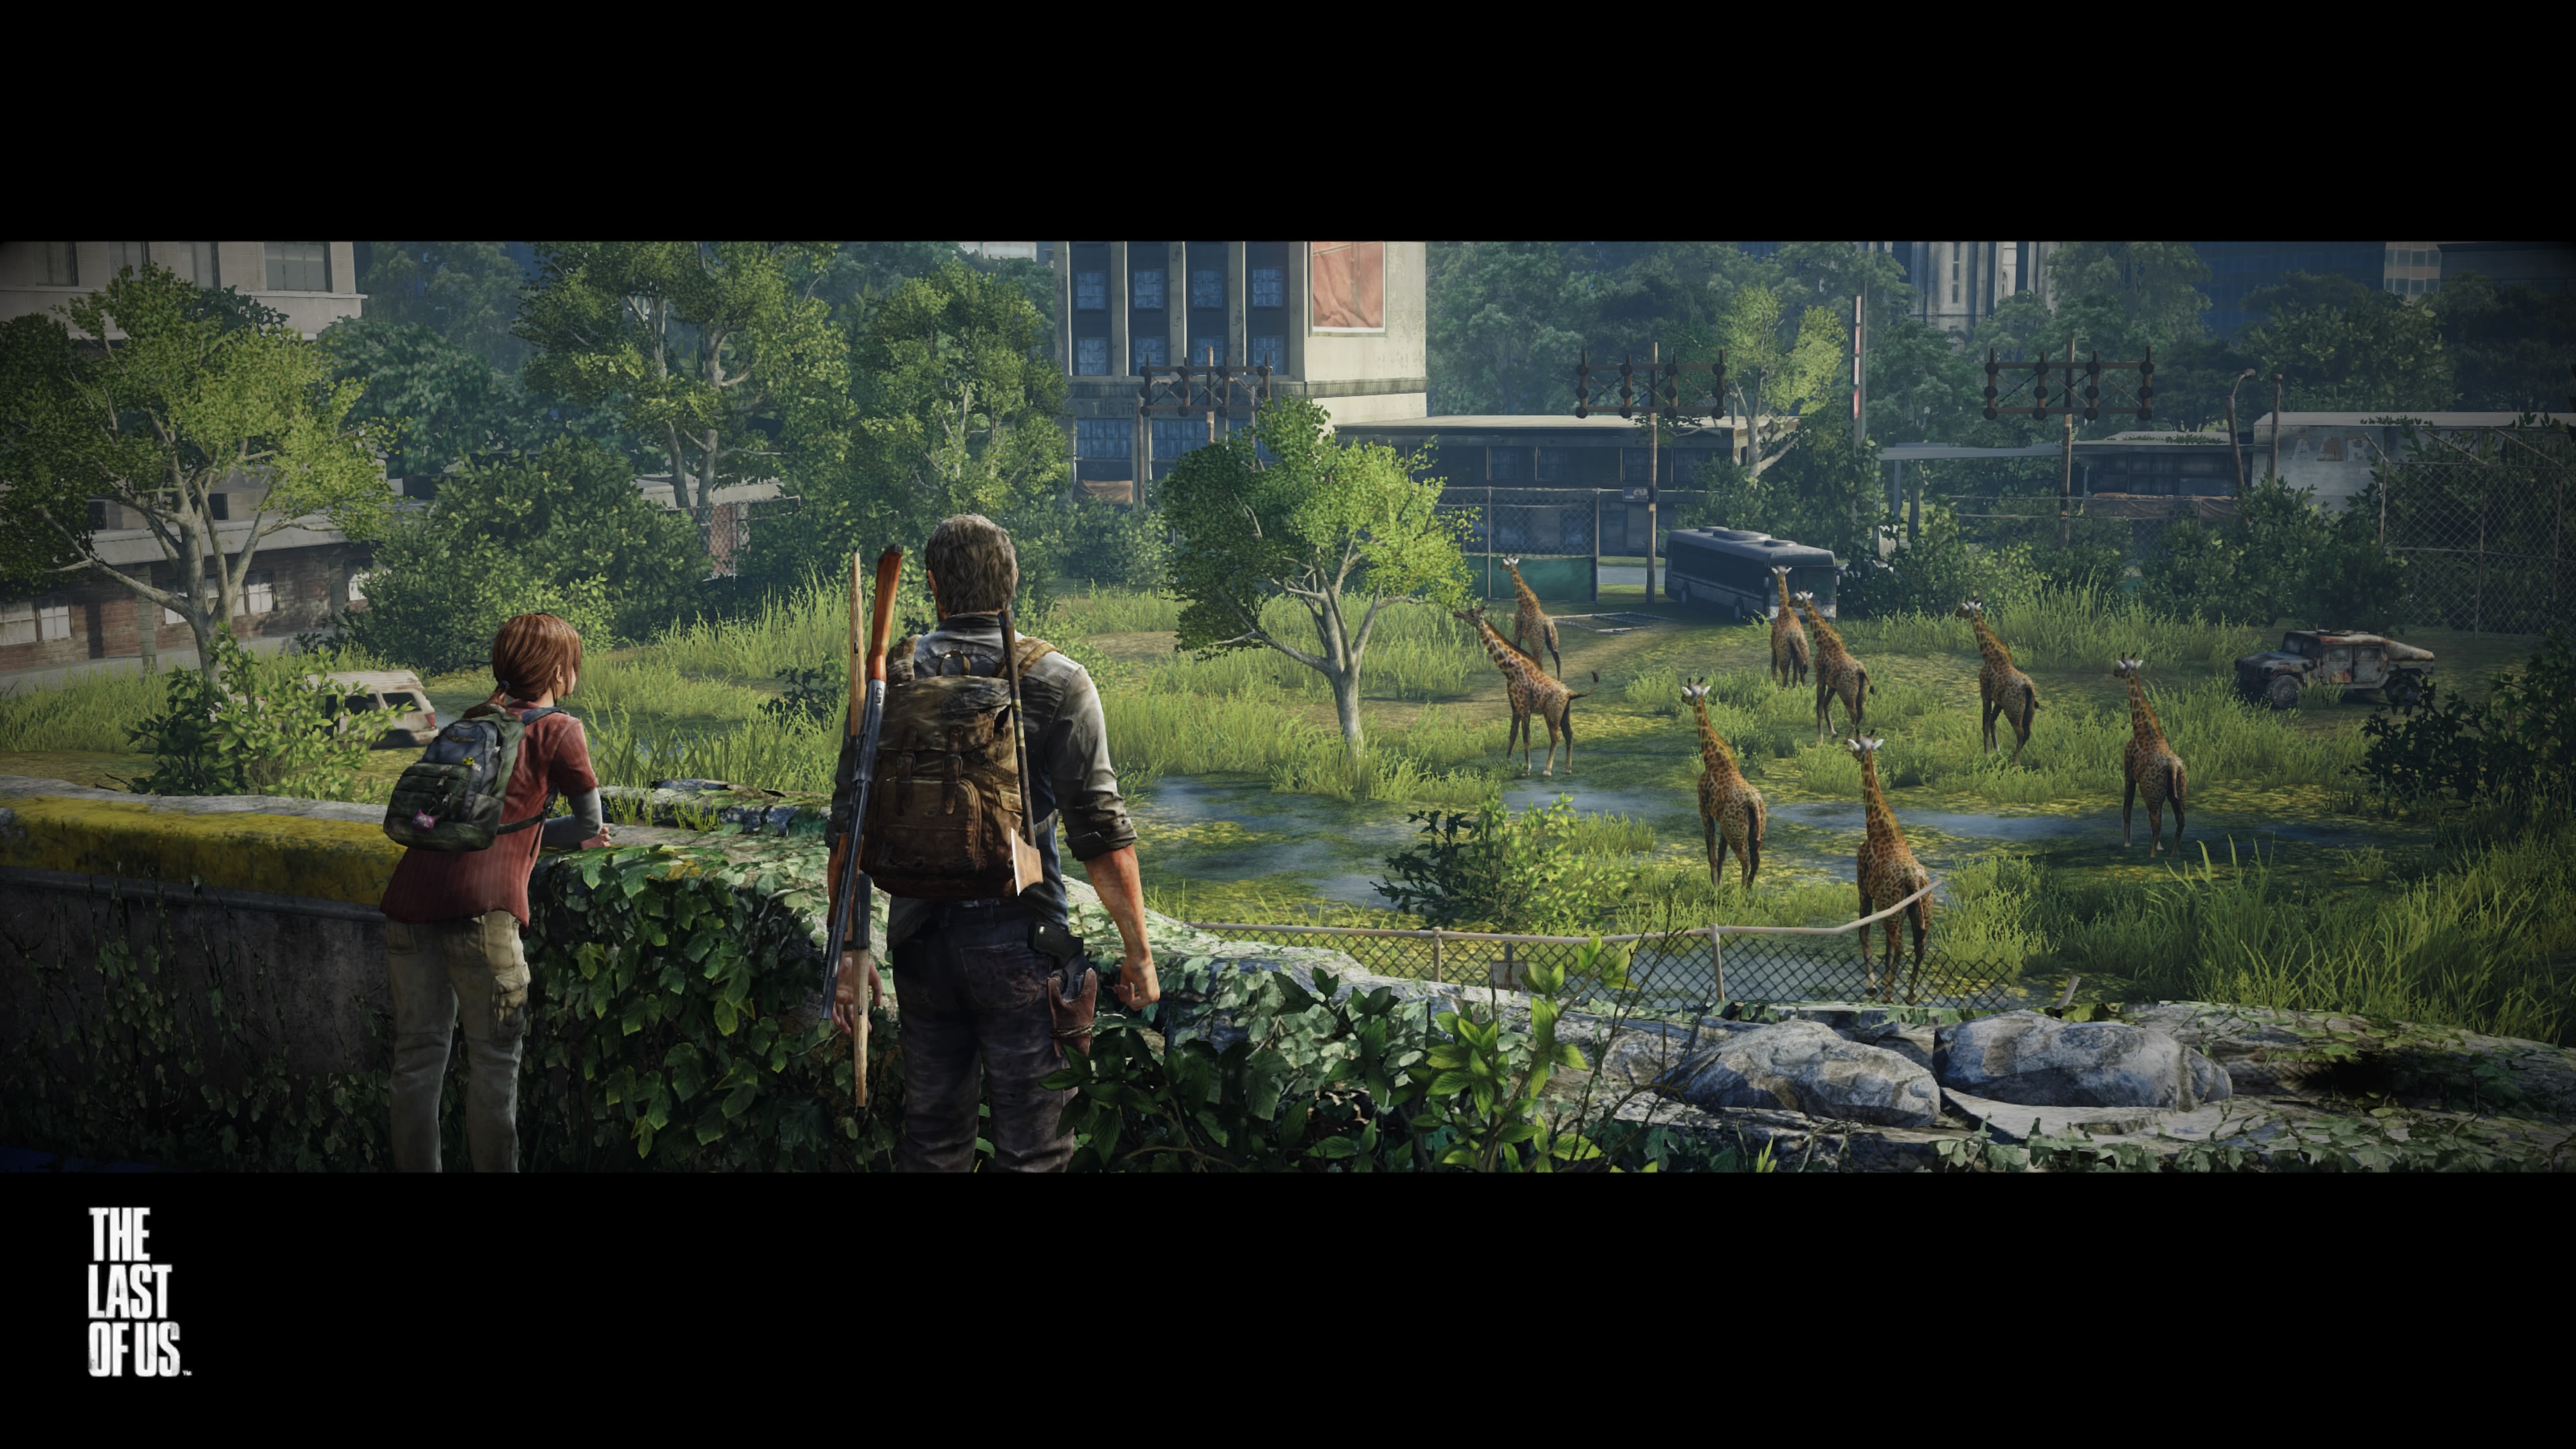 The Last Of Us Ellie Joel Apocalyptic Video Games Screen Shot Ruins Video Game Characters City Overg 3840x2160